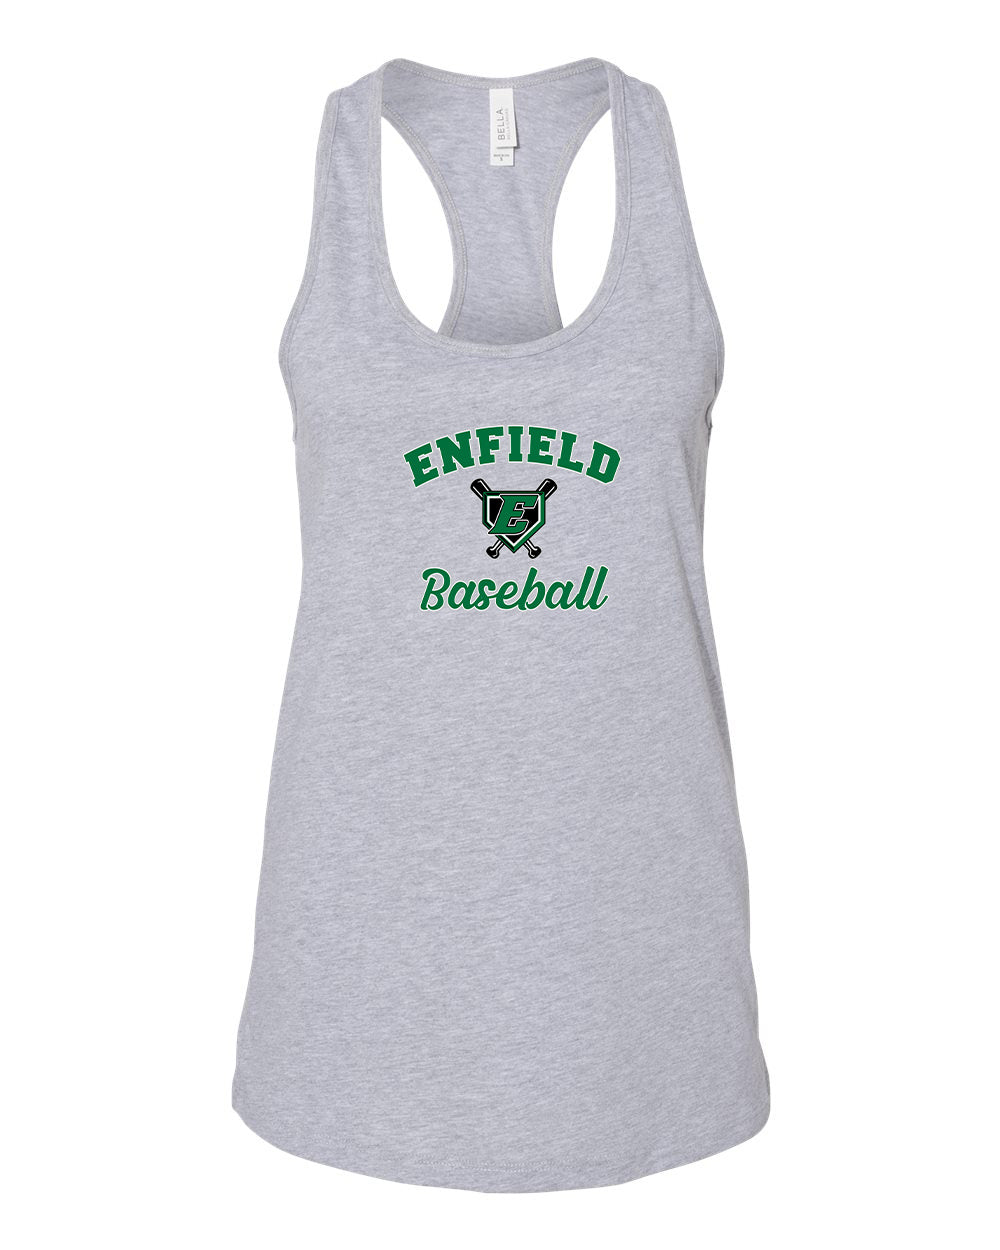 ELL Ladies Tank Top "CC Baseball" - 6008 (color options available)